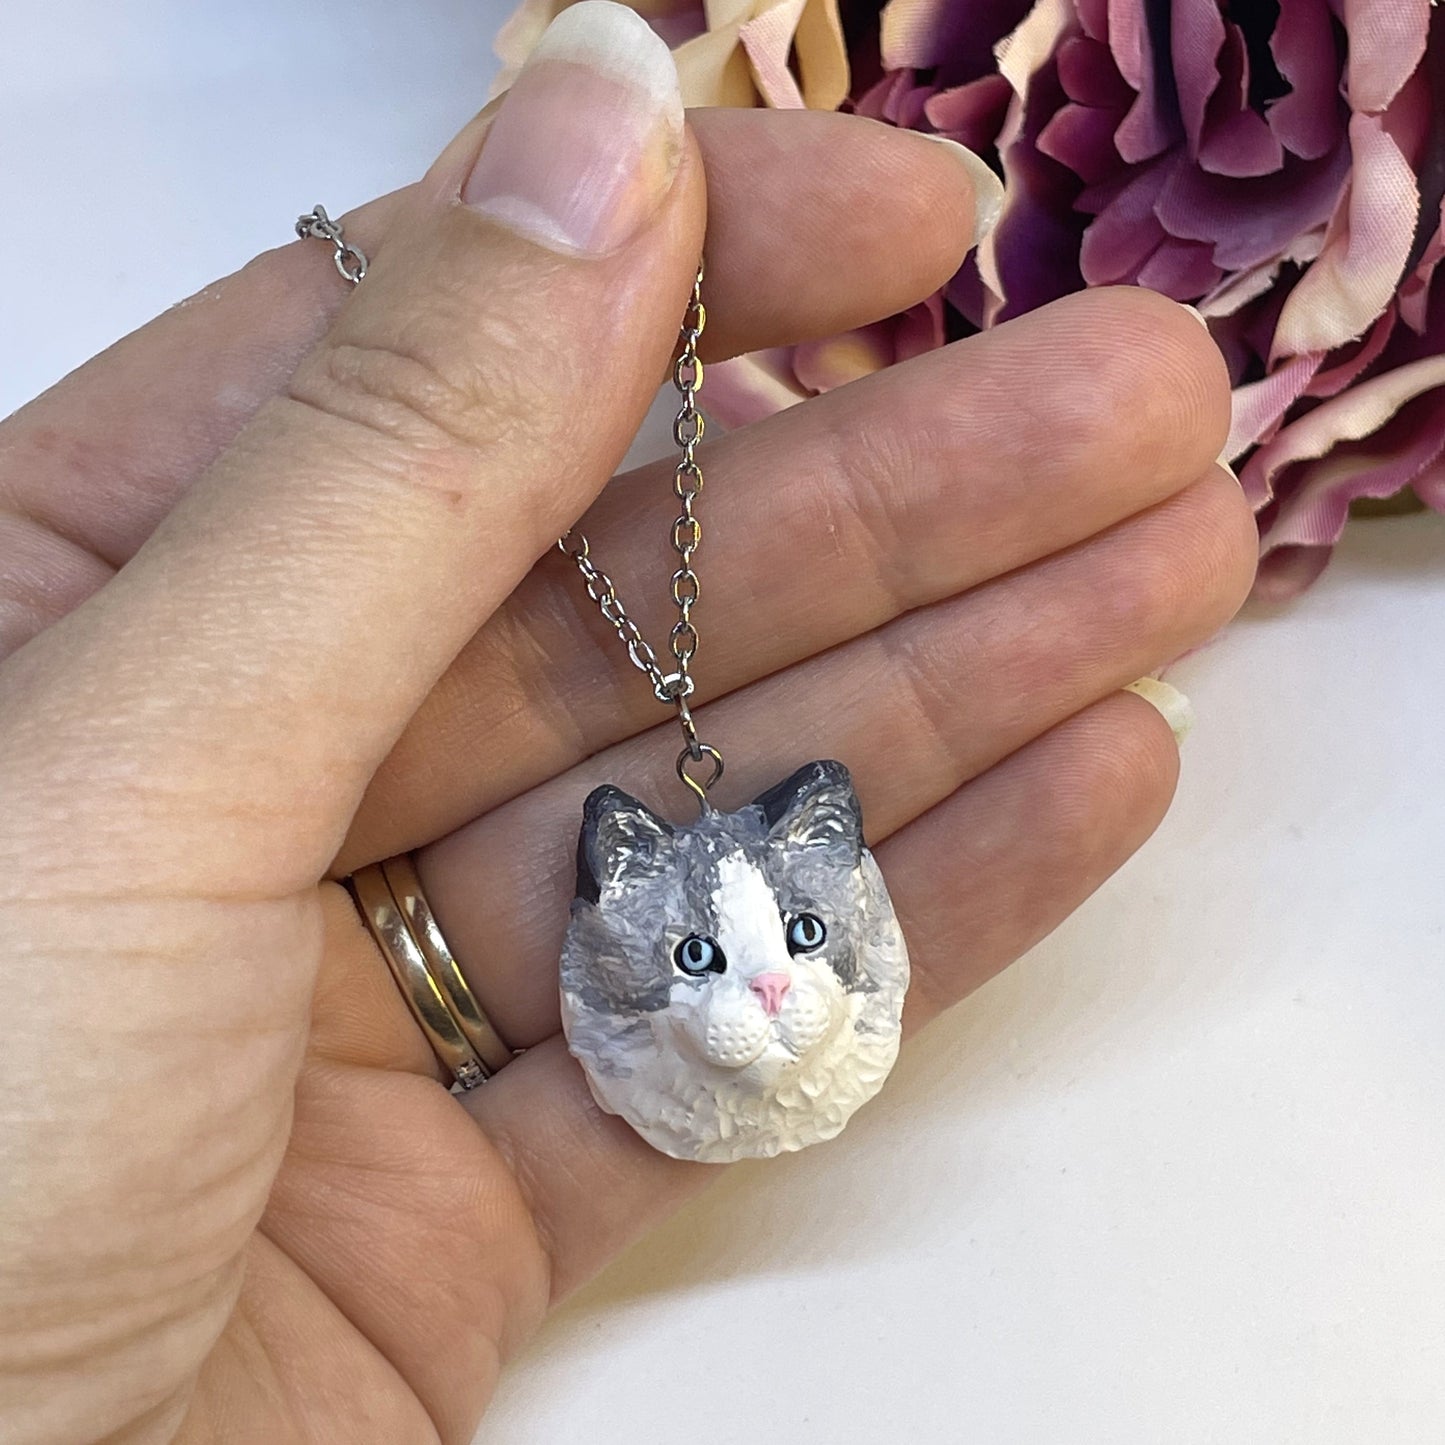 Handmade custom cat necklace pendant on chain, held in front of faux pink flower.